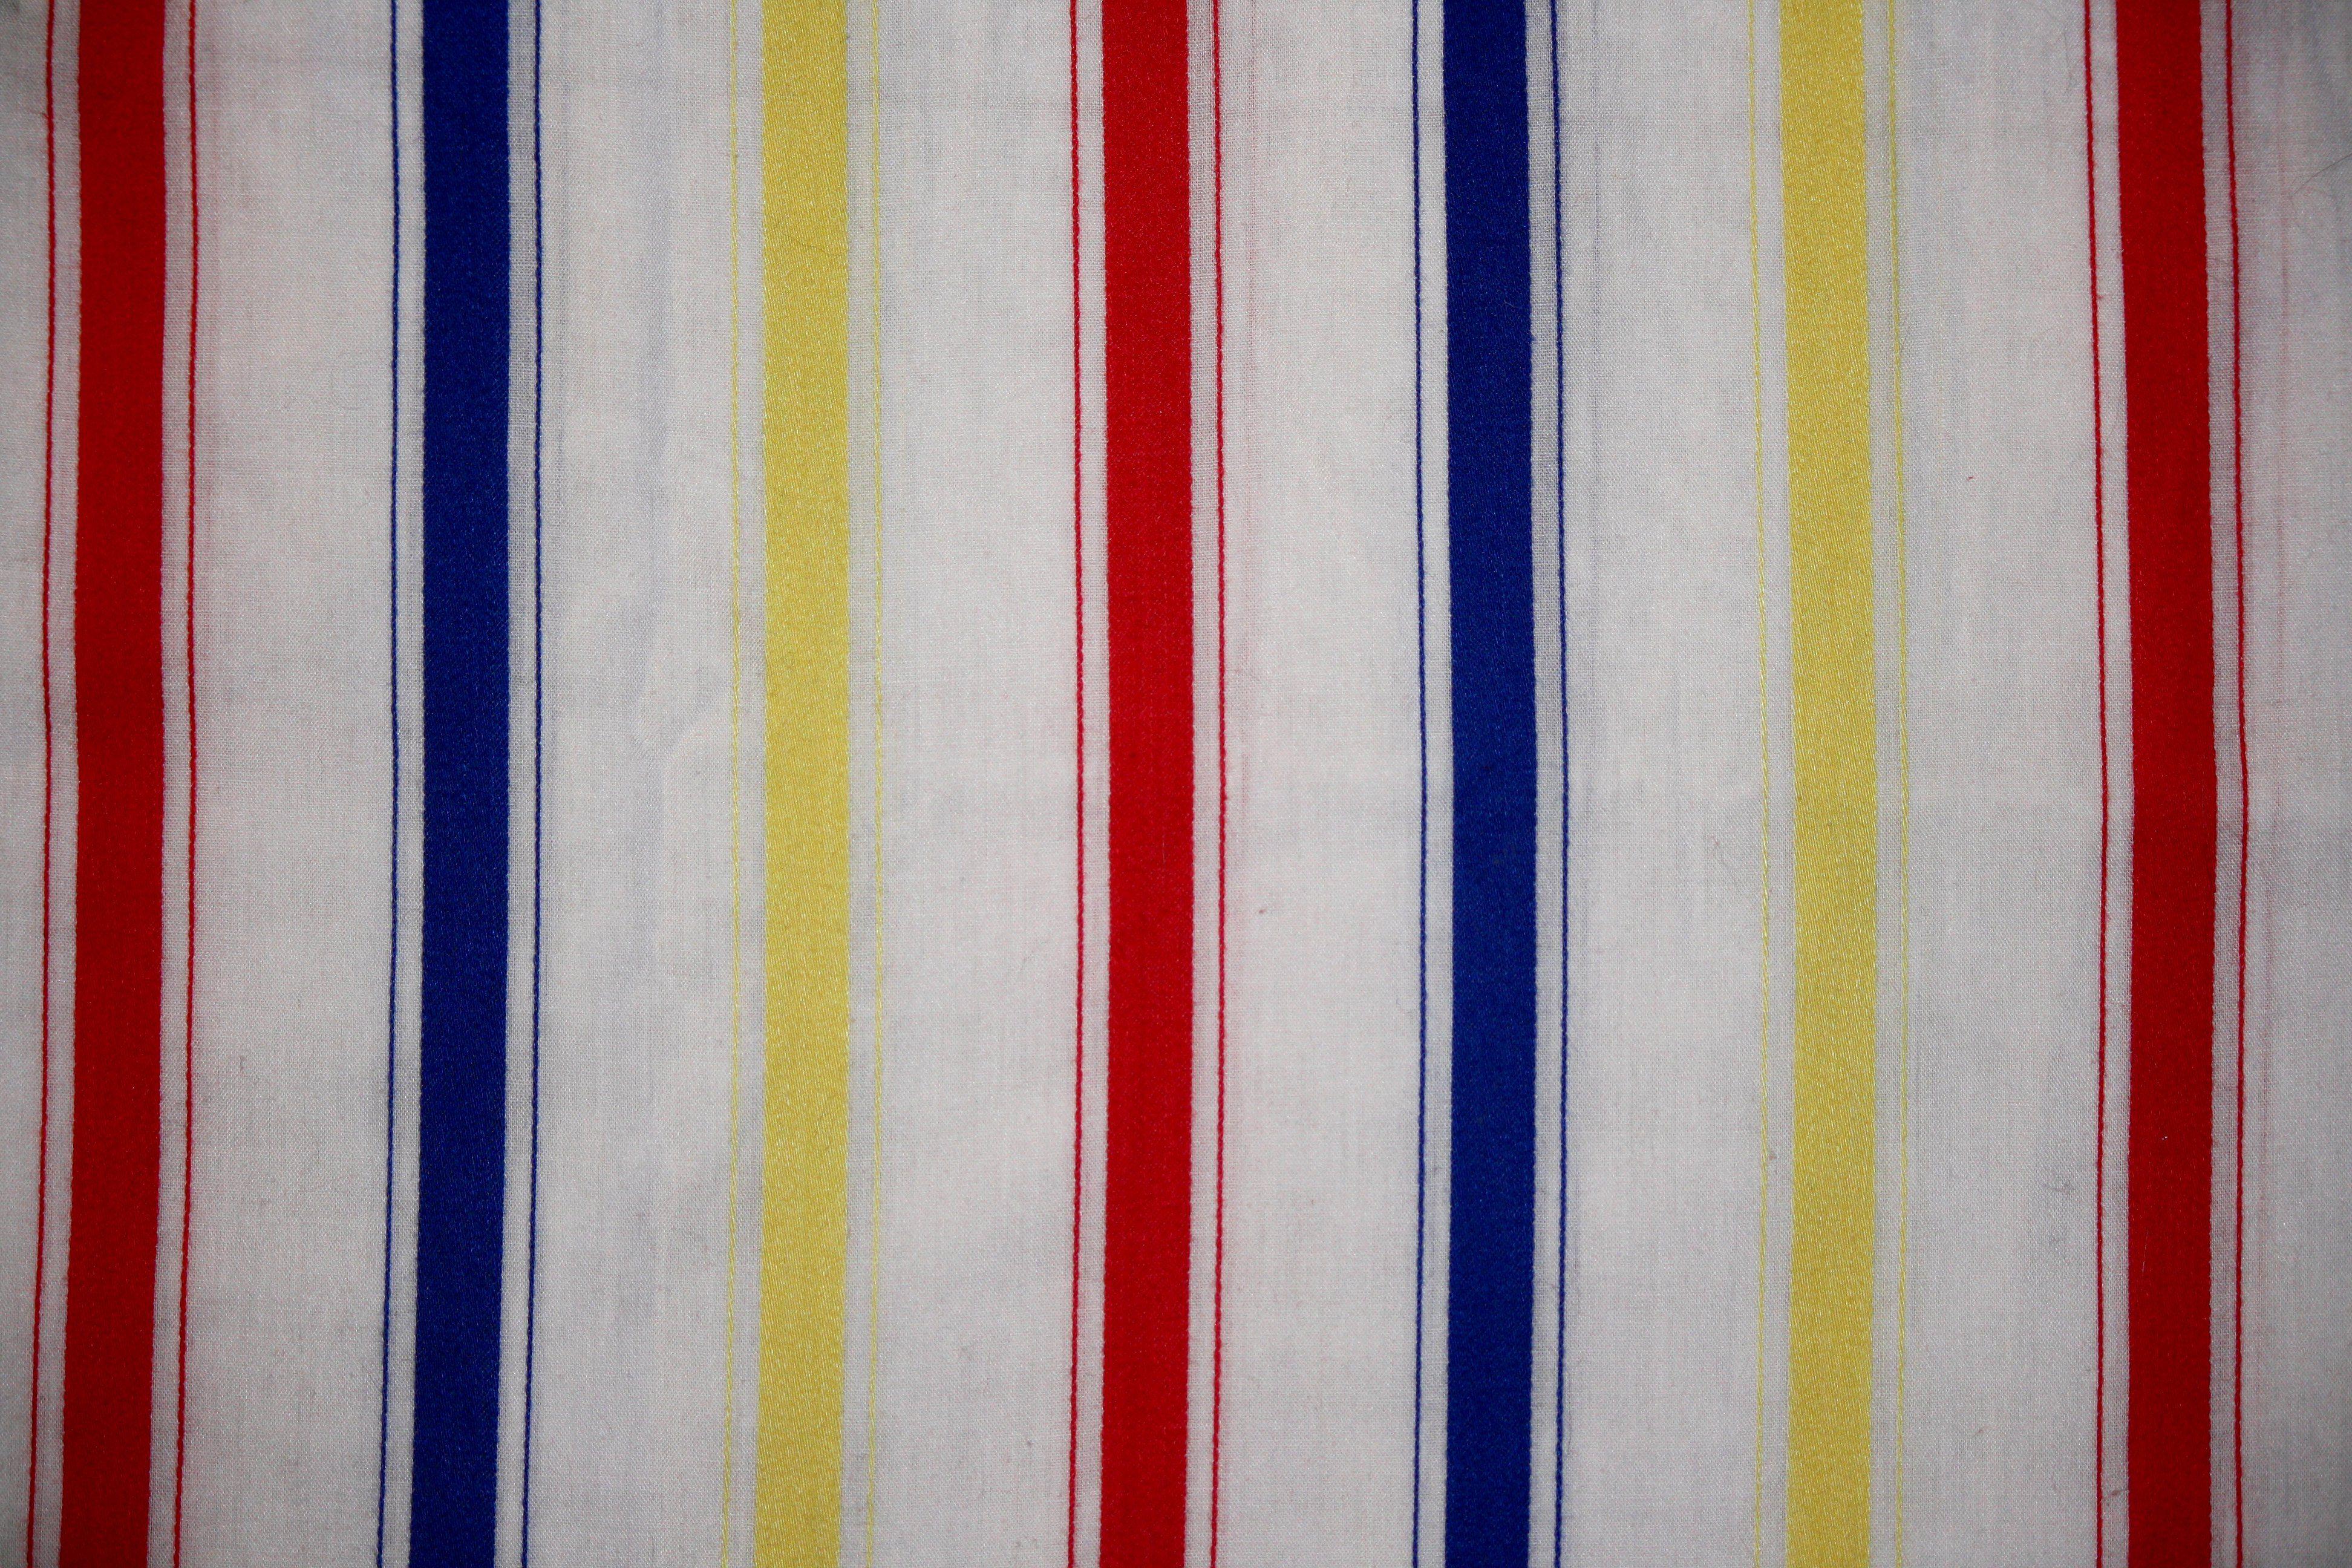 Striped White and Blue and Yellow Logo - Striped Fabric Texture Red, Blue and Yellow on White Picture | Free ...